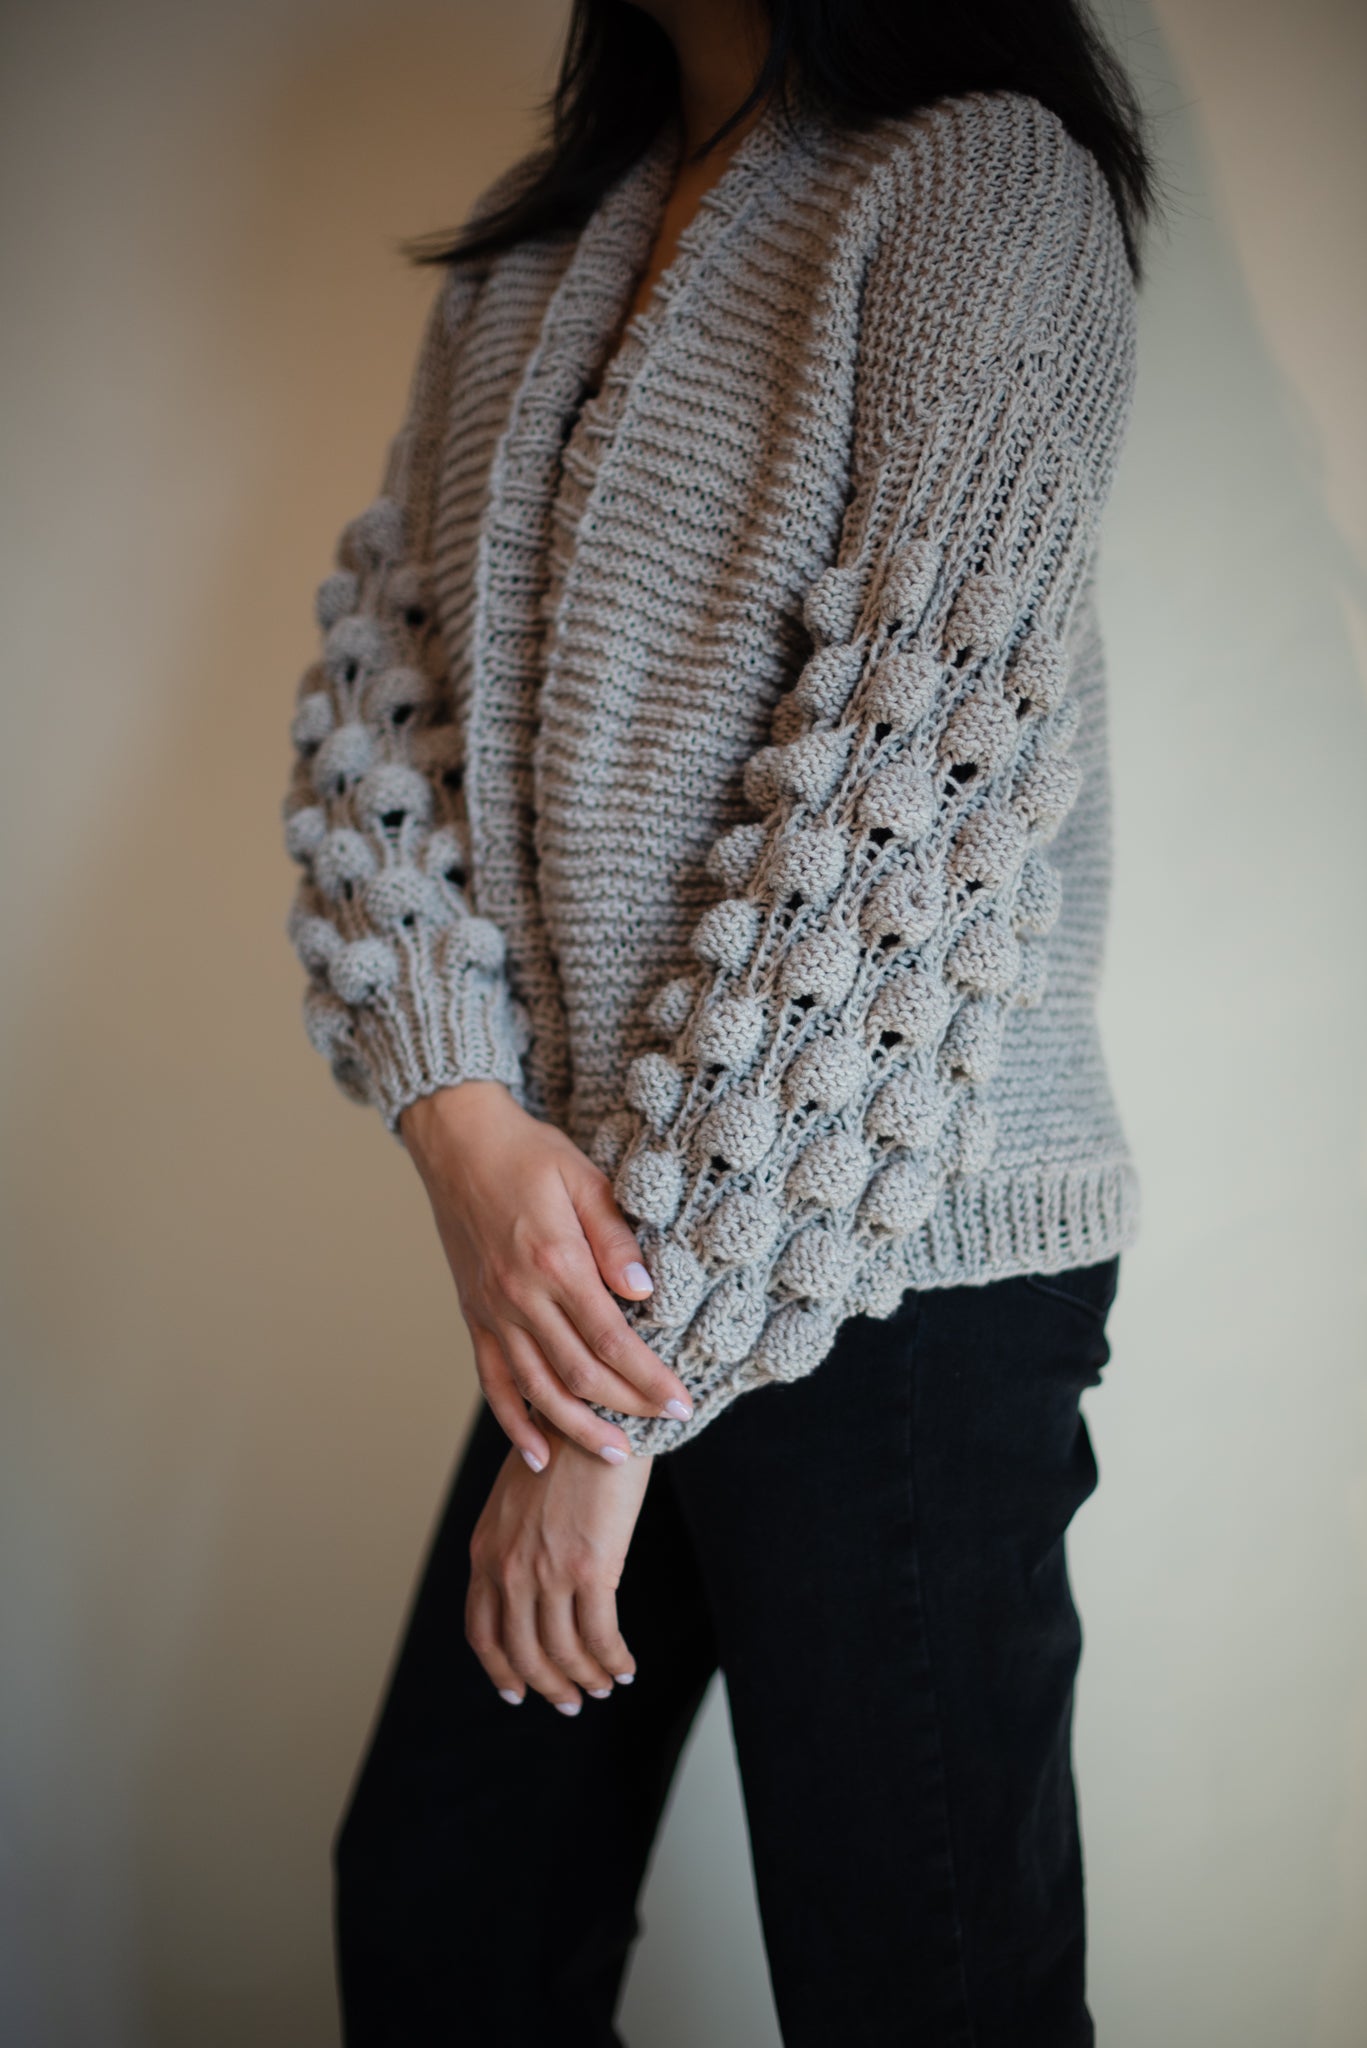 The Bubble Cardigan